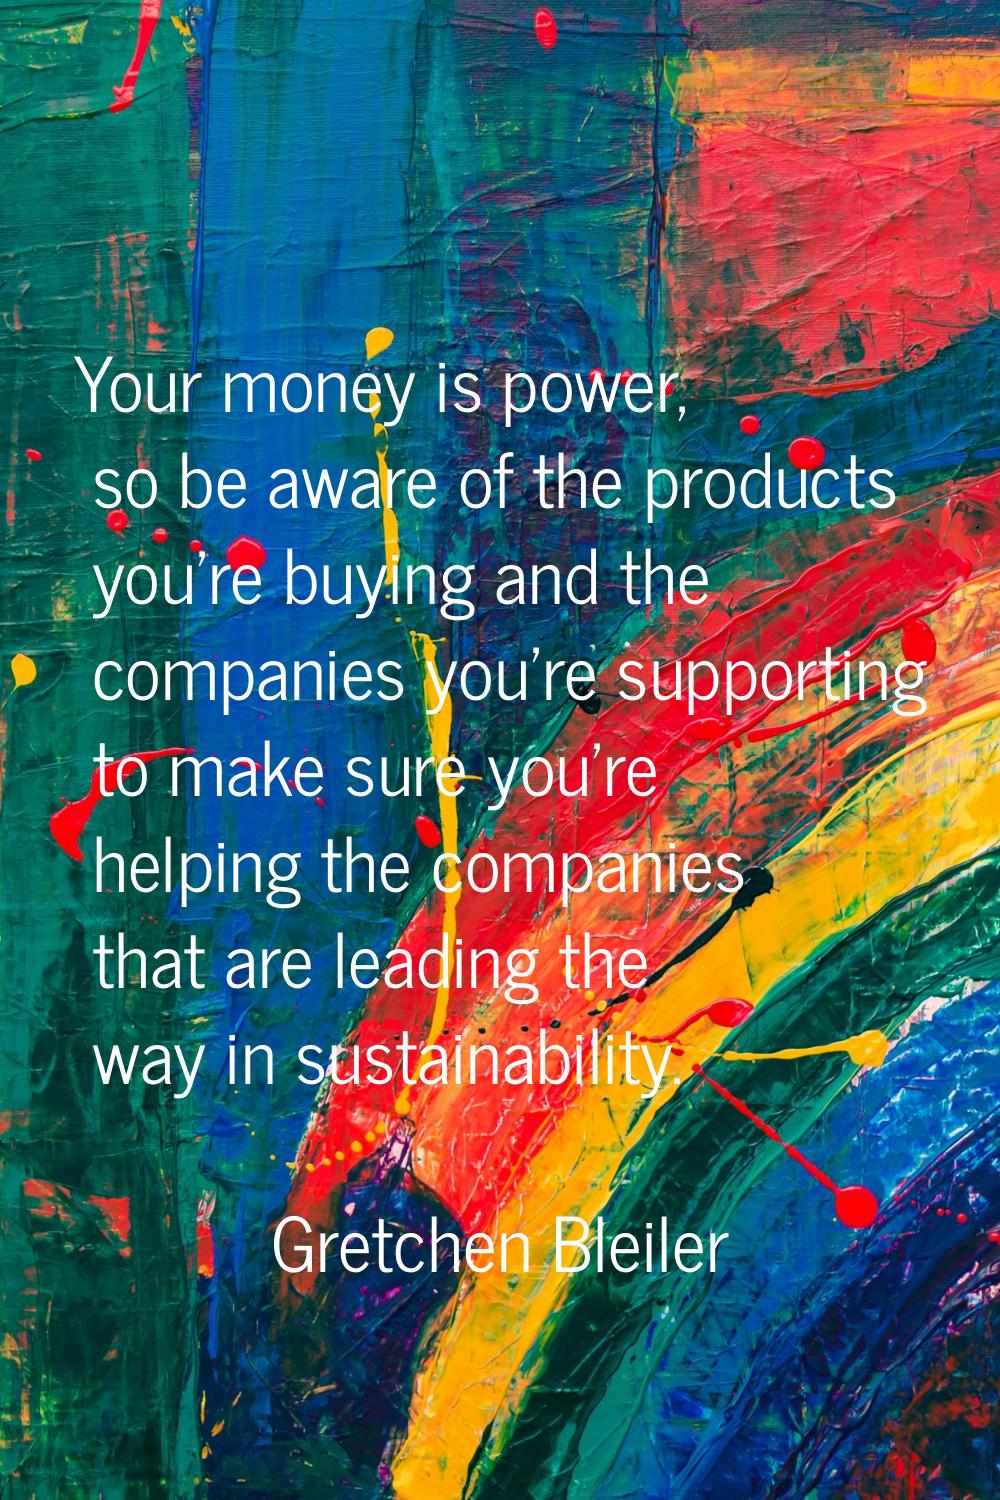 Your money is power, so be aware of the products you're buying and the companies you're supporting 